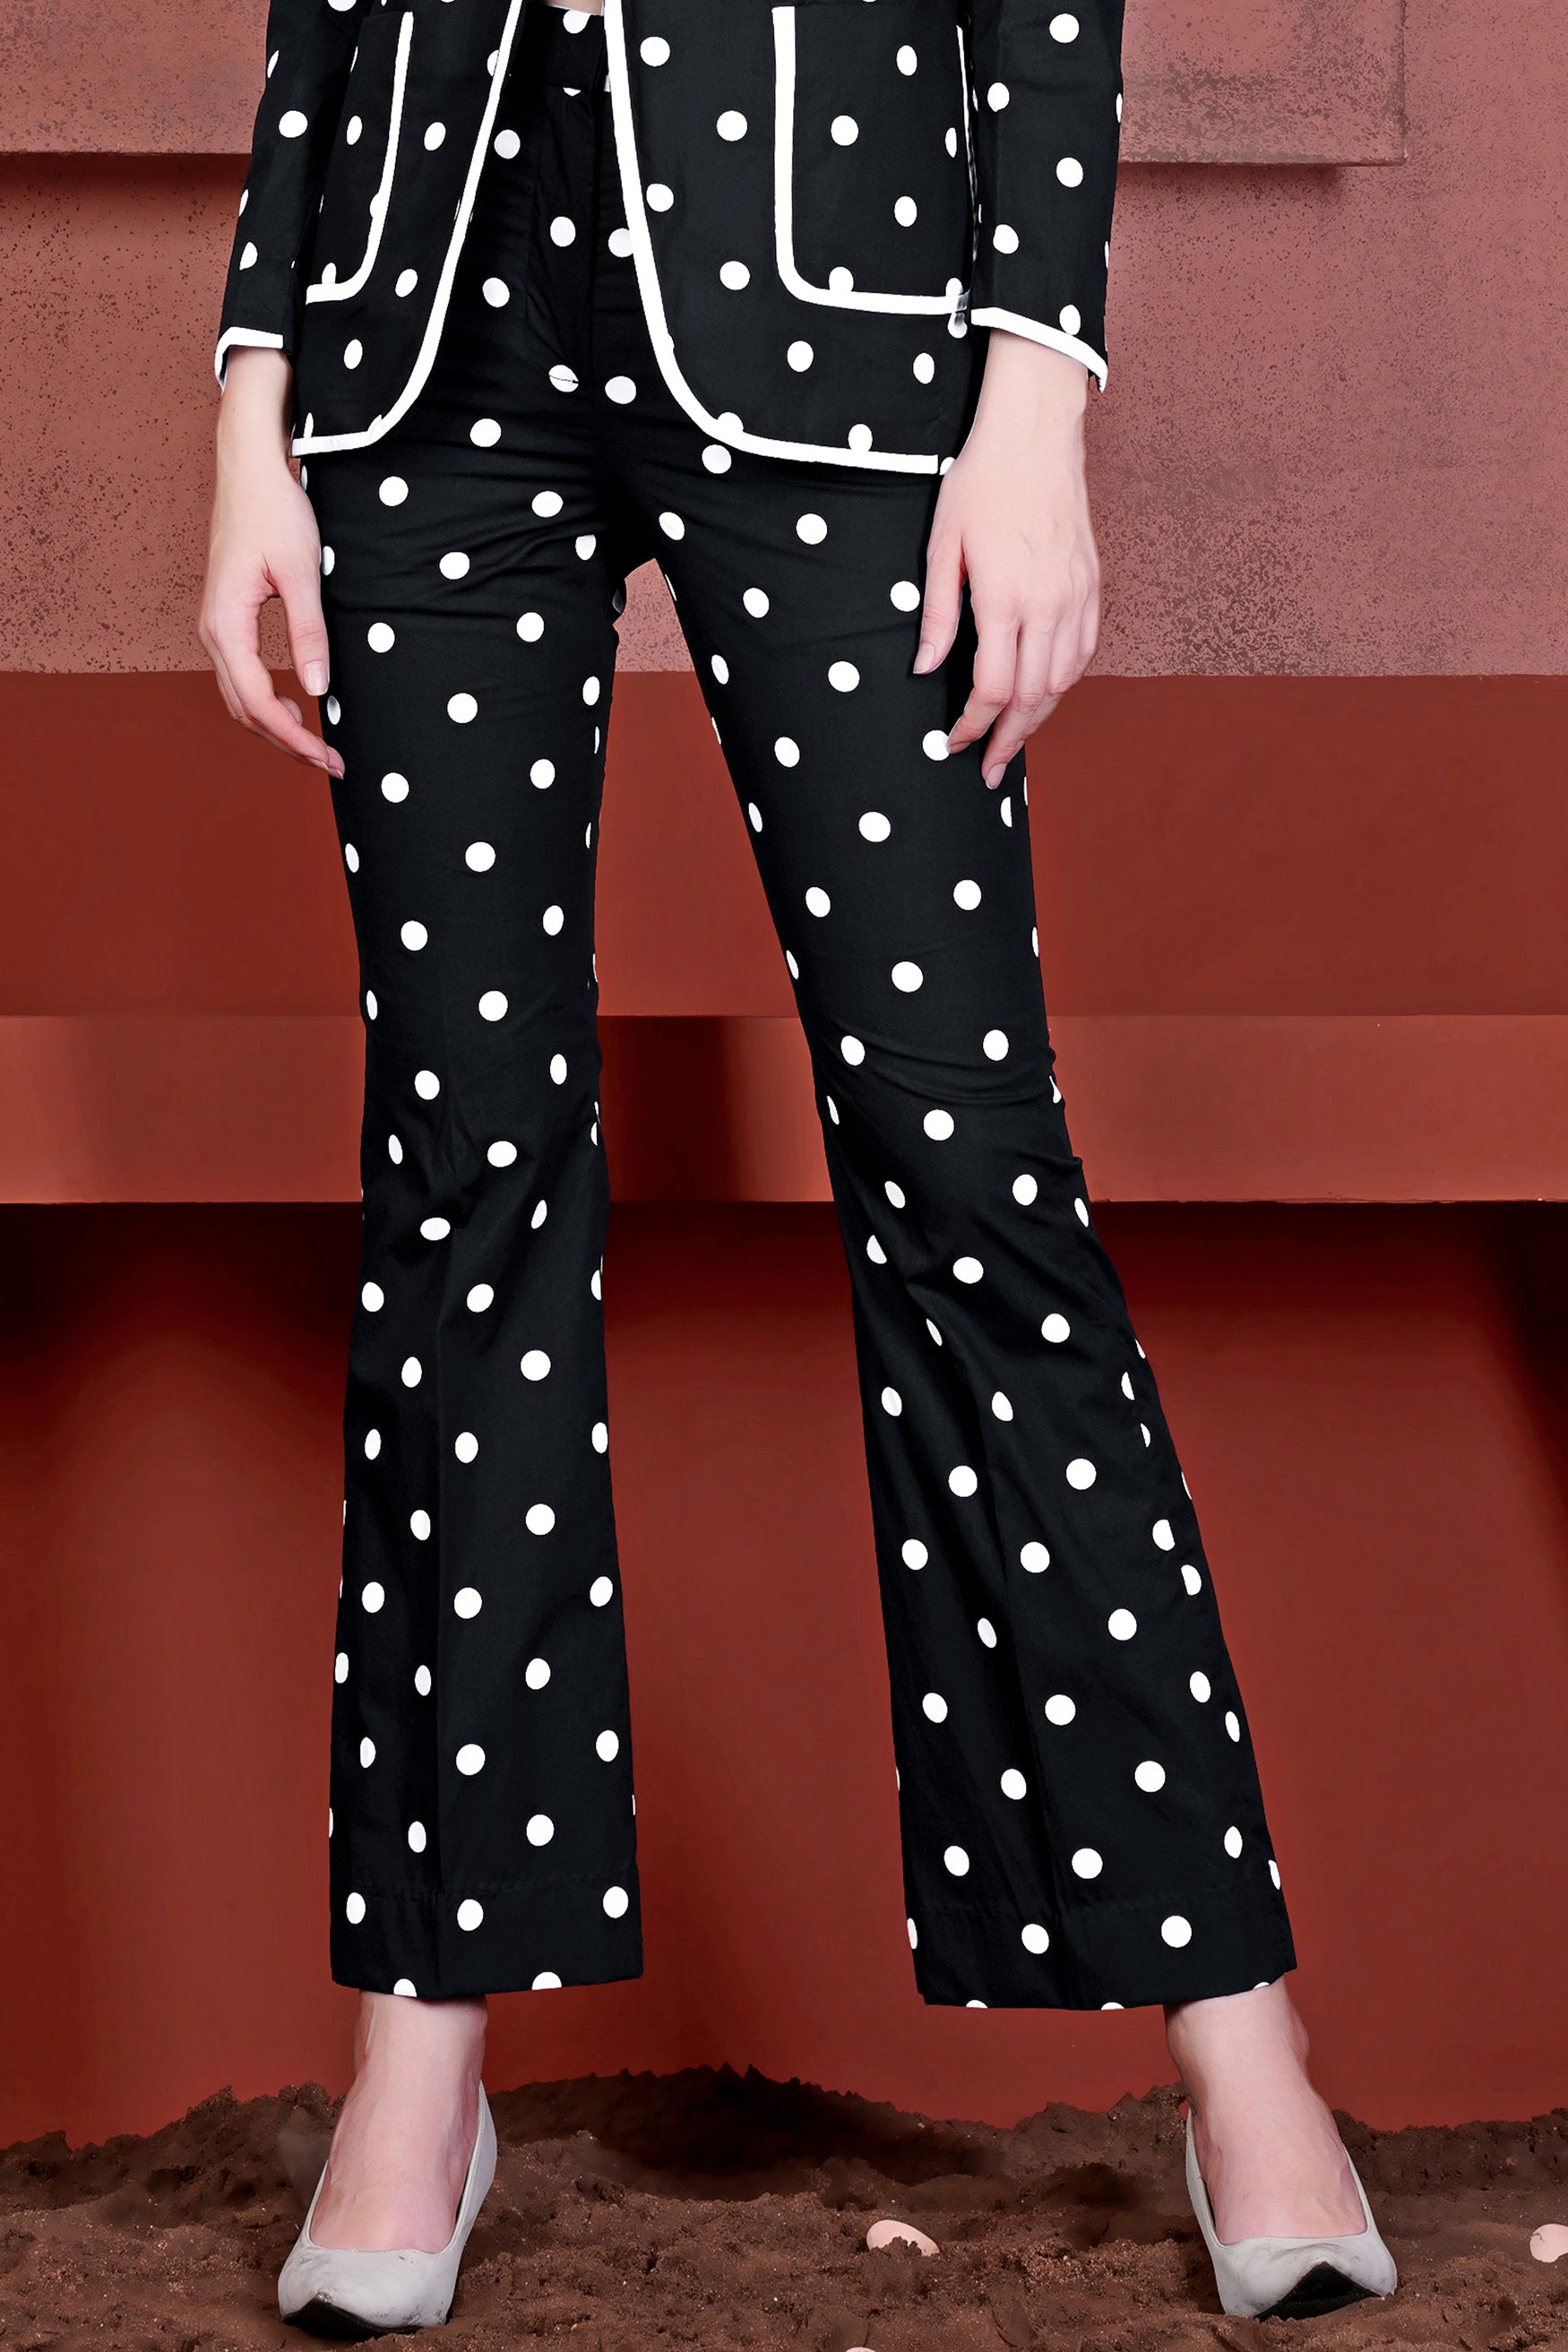 Jade Black and Bright White Polka Dotted Premium Cotton Women’s Pant